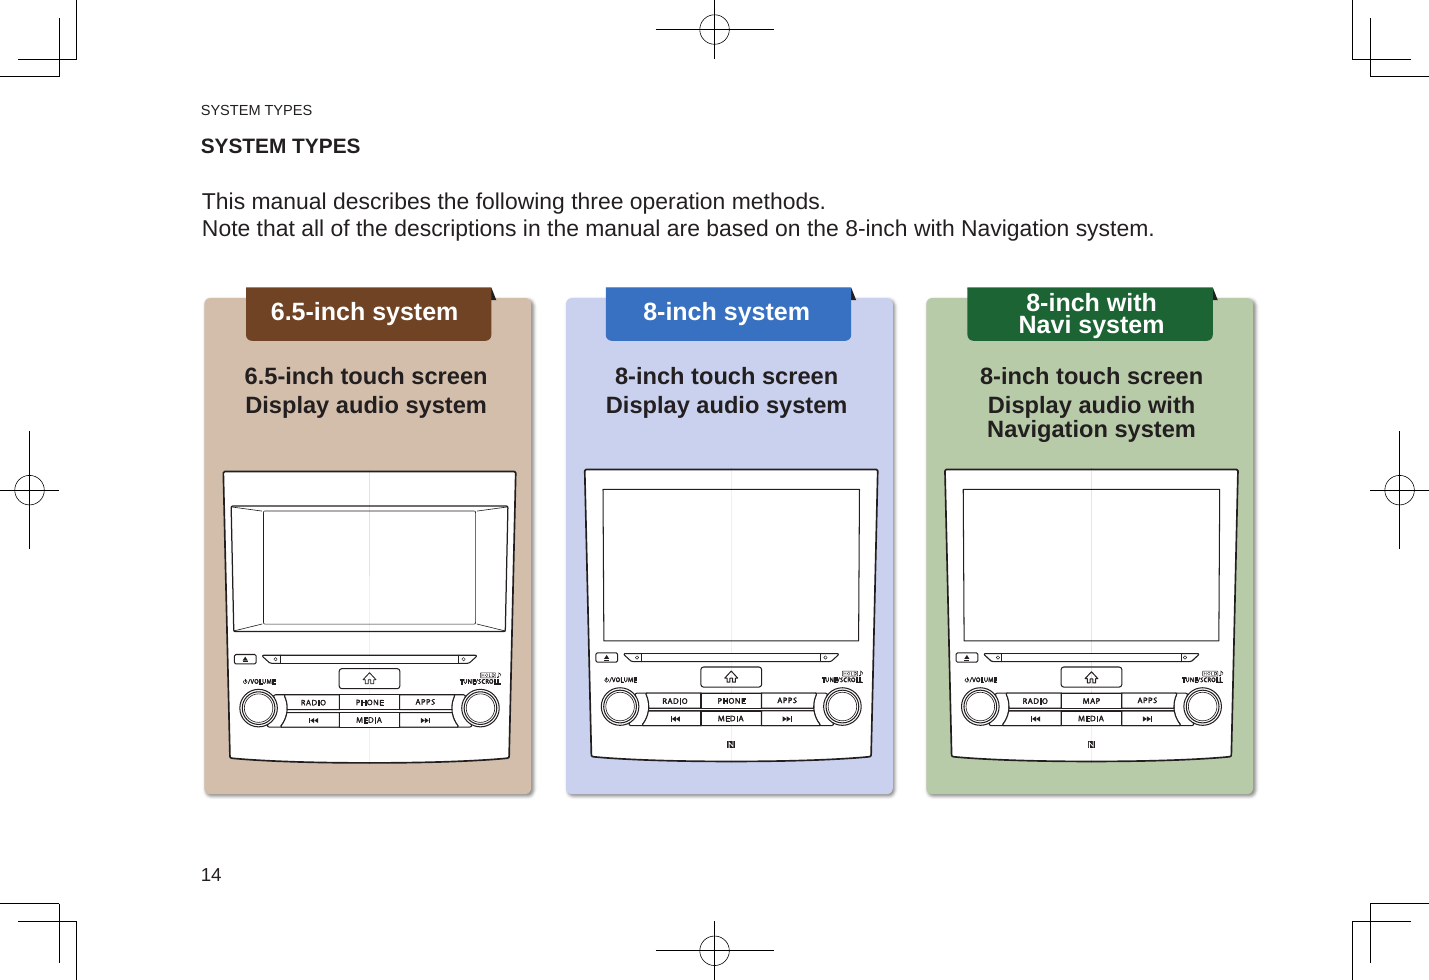 SYSTEM TYPES14SYSTEM TYPESThis manual describes the following three operation methods.Note that all of the descriptions in the manual are based on the 8-inch with Navigation system.6.5-inch system 8-inch system 8-inch with Navi system6.5-inch touch screenDisplay audio system8-inch touch screenDisplay audio system8-inch touch screenDisplay audio with Navigation system